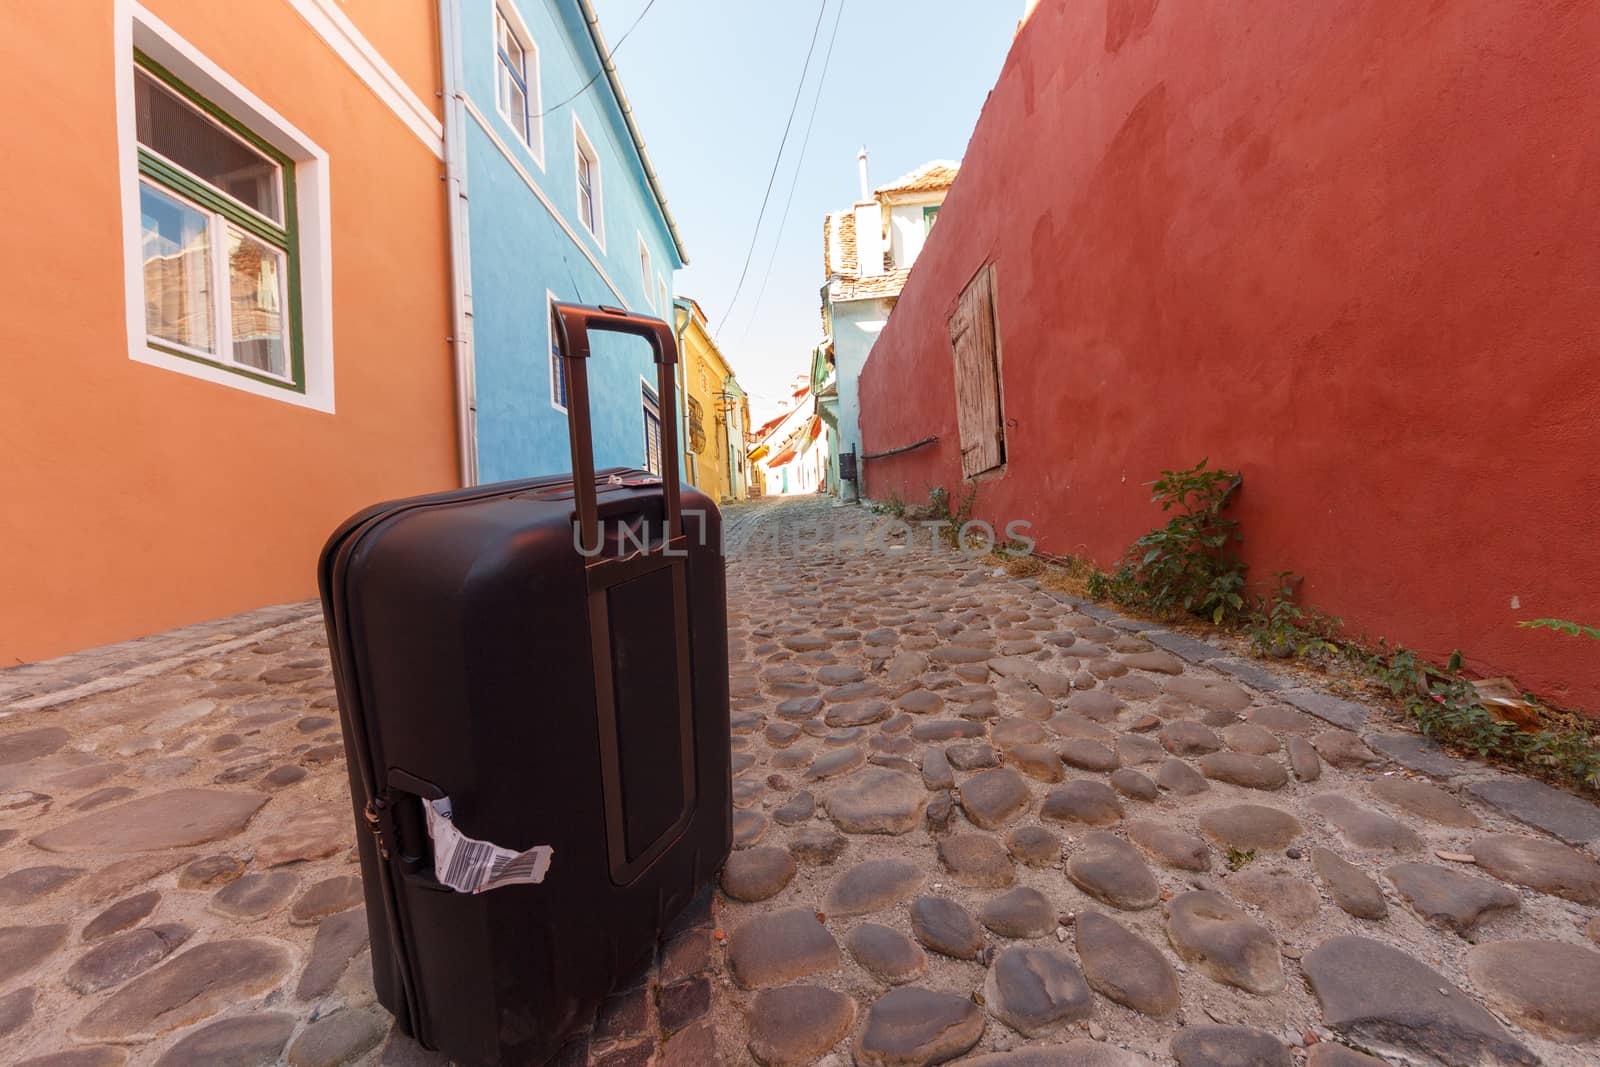 Black troler suitcase on an empty medieval city street. Colorful buildings and stone paved street with blue sky. Travel concept.